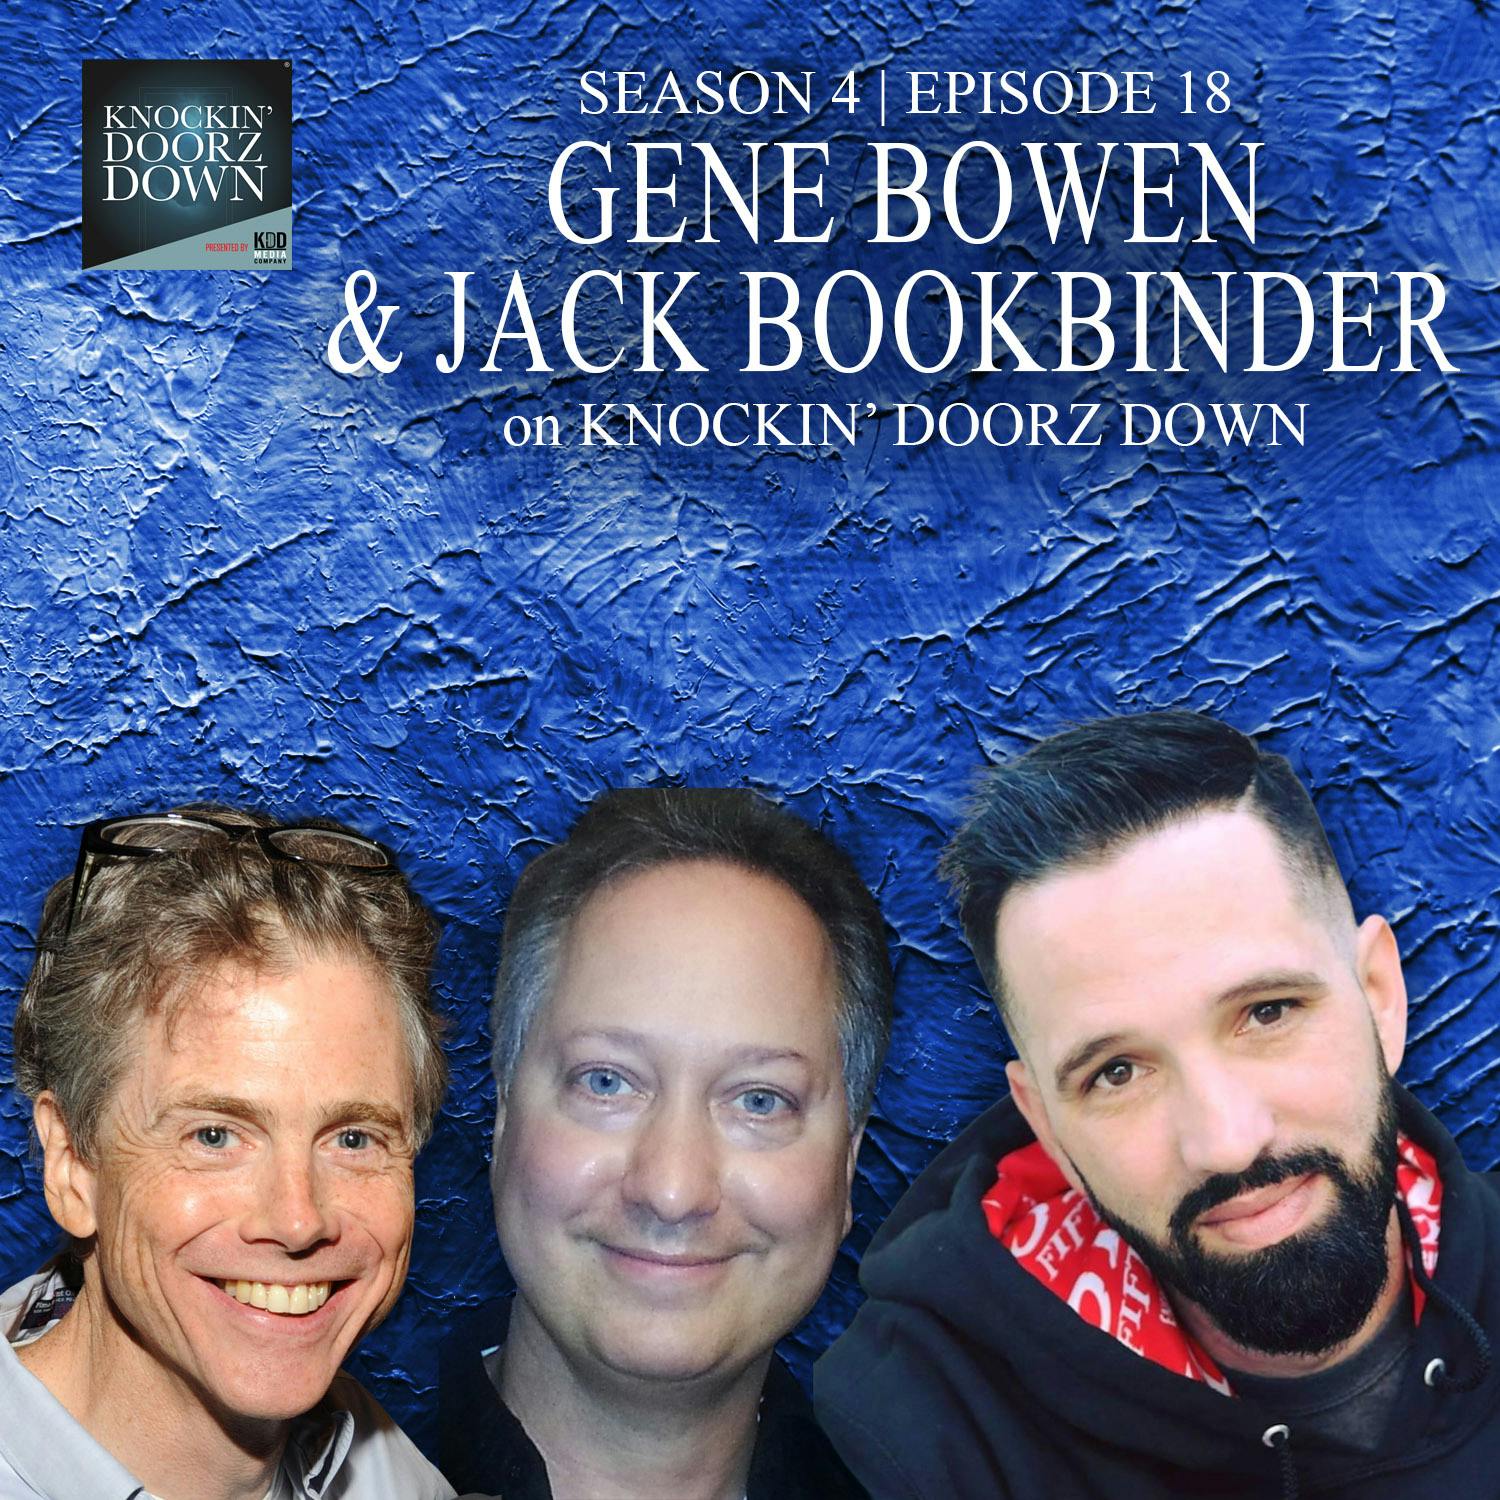 Gene Bowen & Jack Bookbinder | Using Their Adverse Time To Mentoring The Youth With Road Recovery